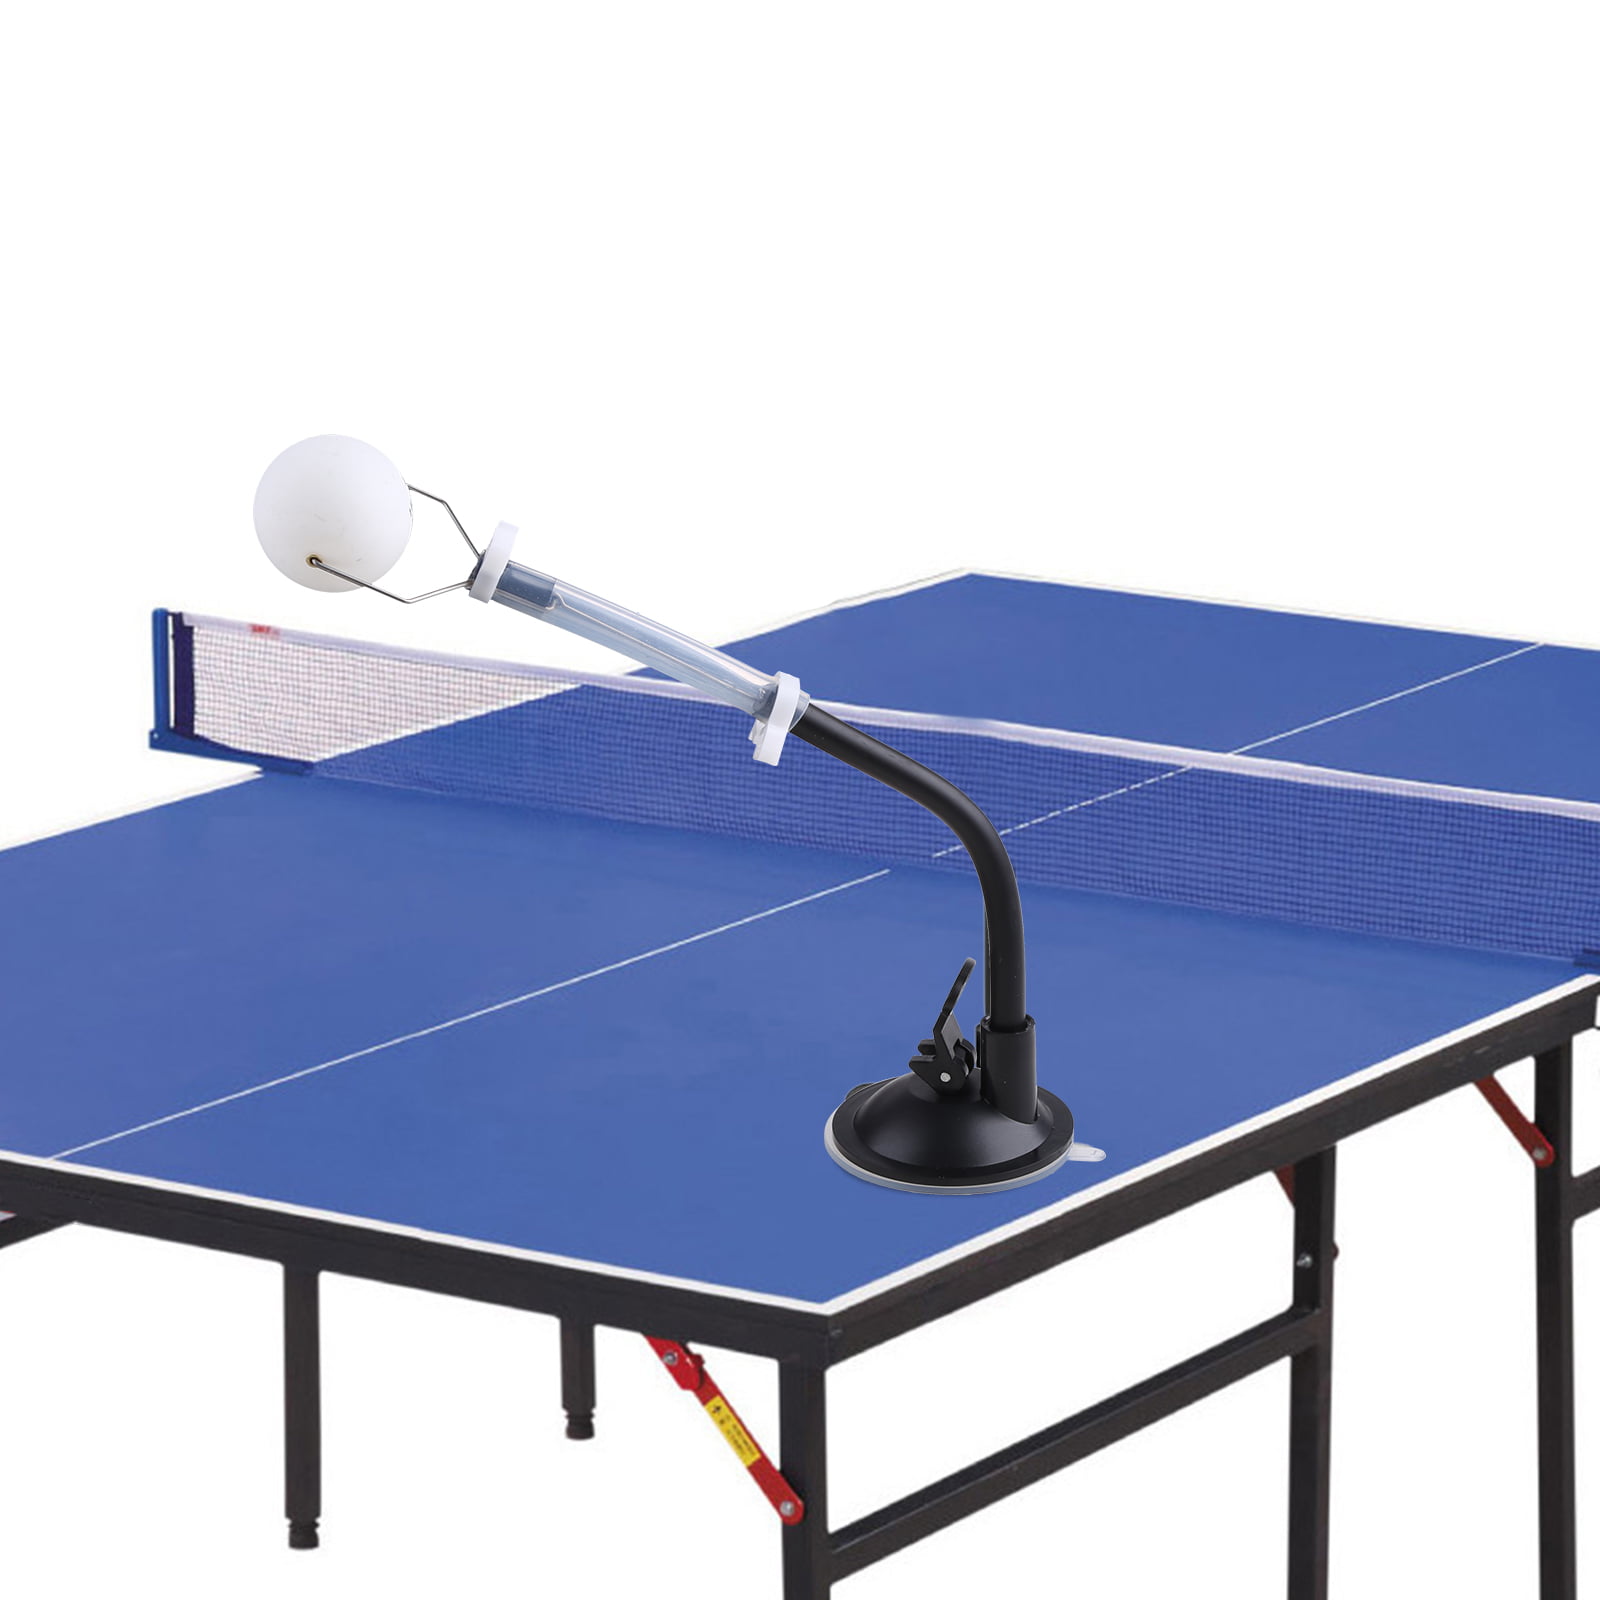 Advance Flexible Ping Pong Table Tennis Trainer Practice Bounce Return Board 